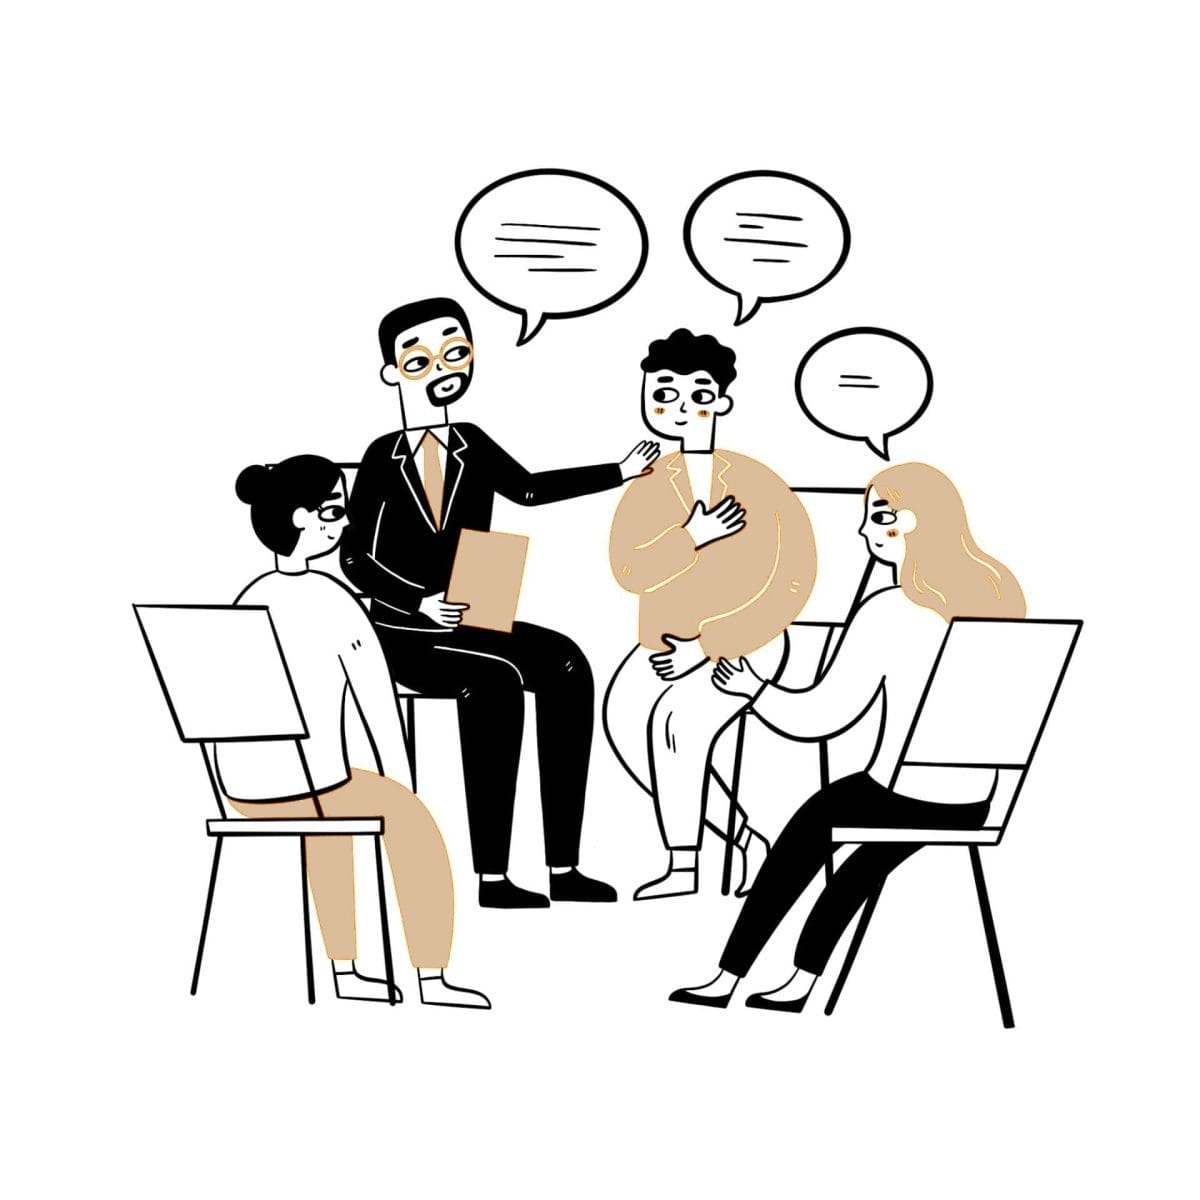 Cartoonized image of Steven Lozada facilitating a Team coaching session with three people